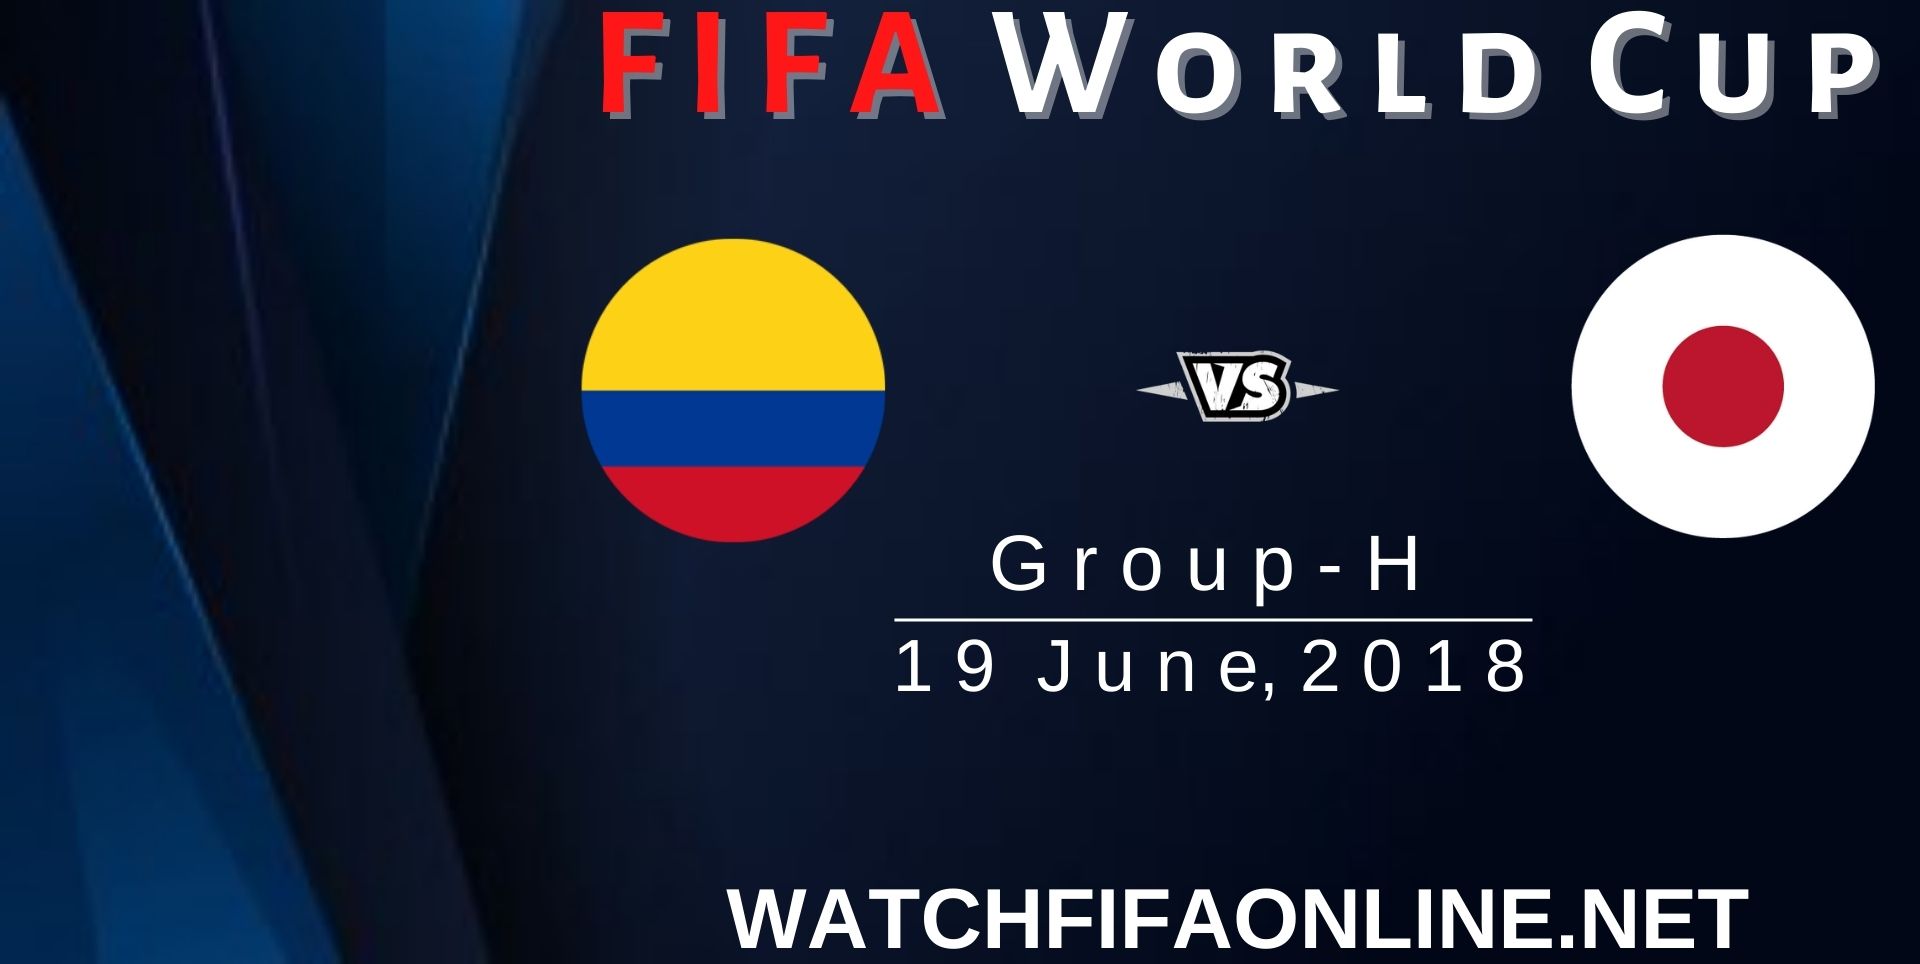 Colombia Vs Japan FIFA World Cup Highlights 2018